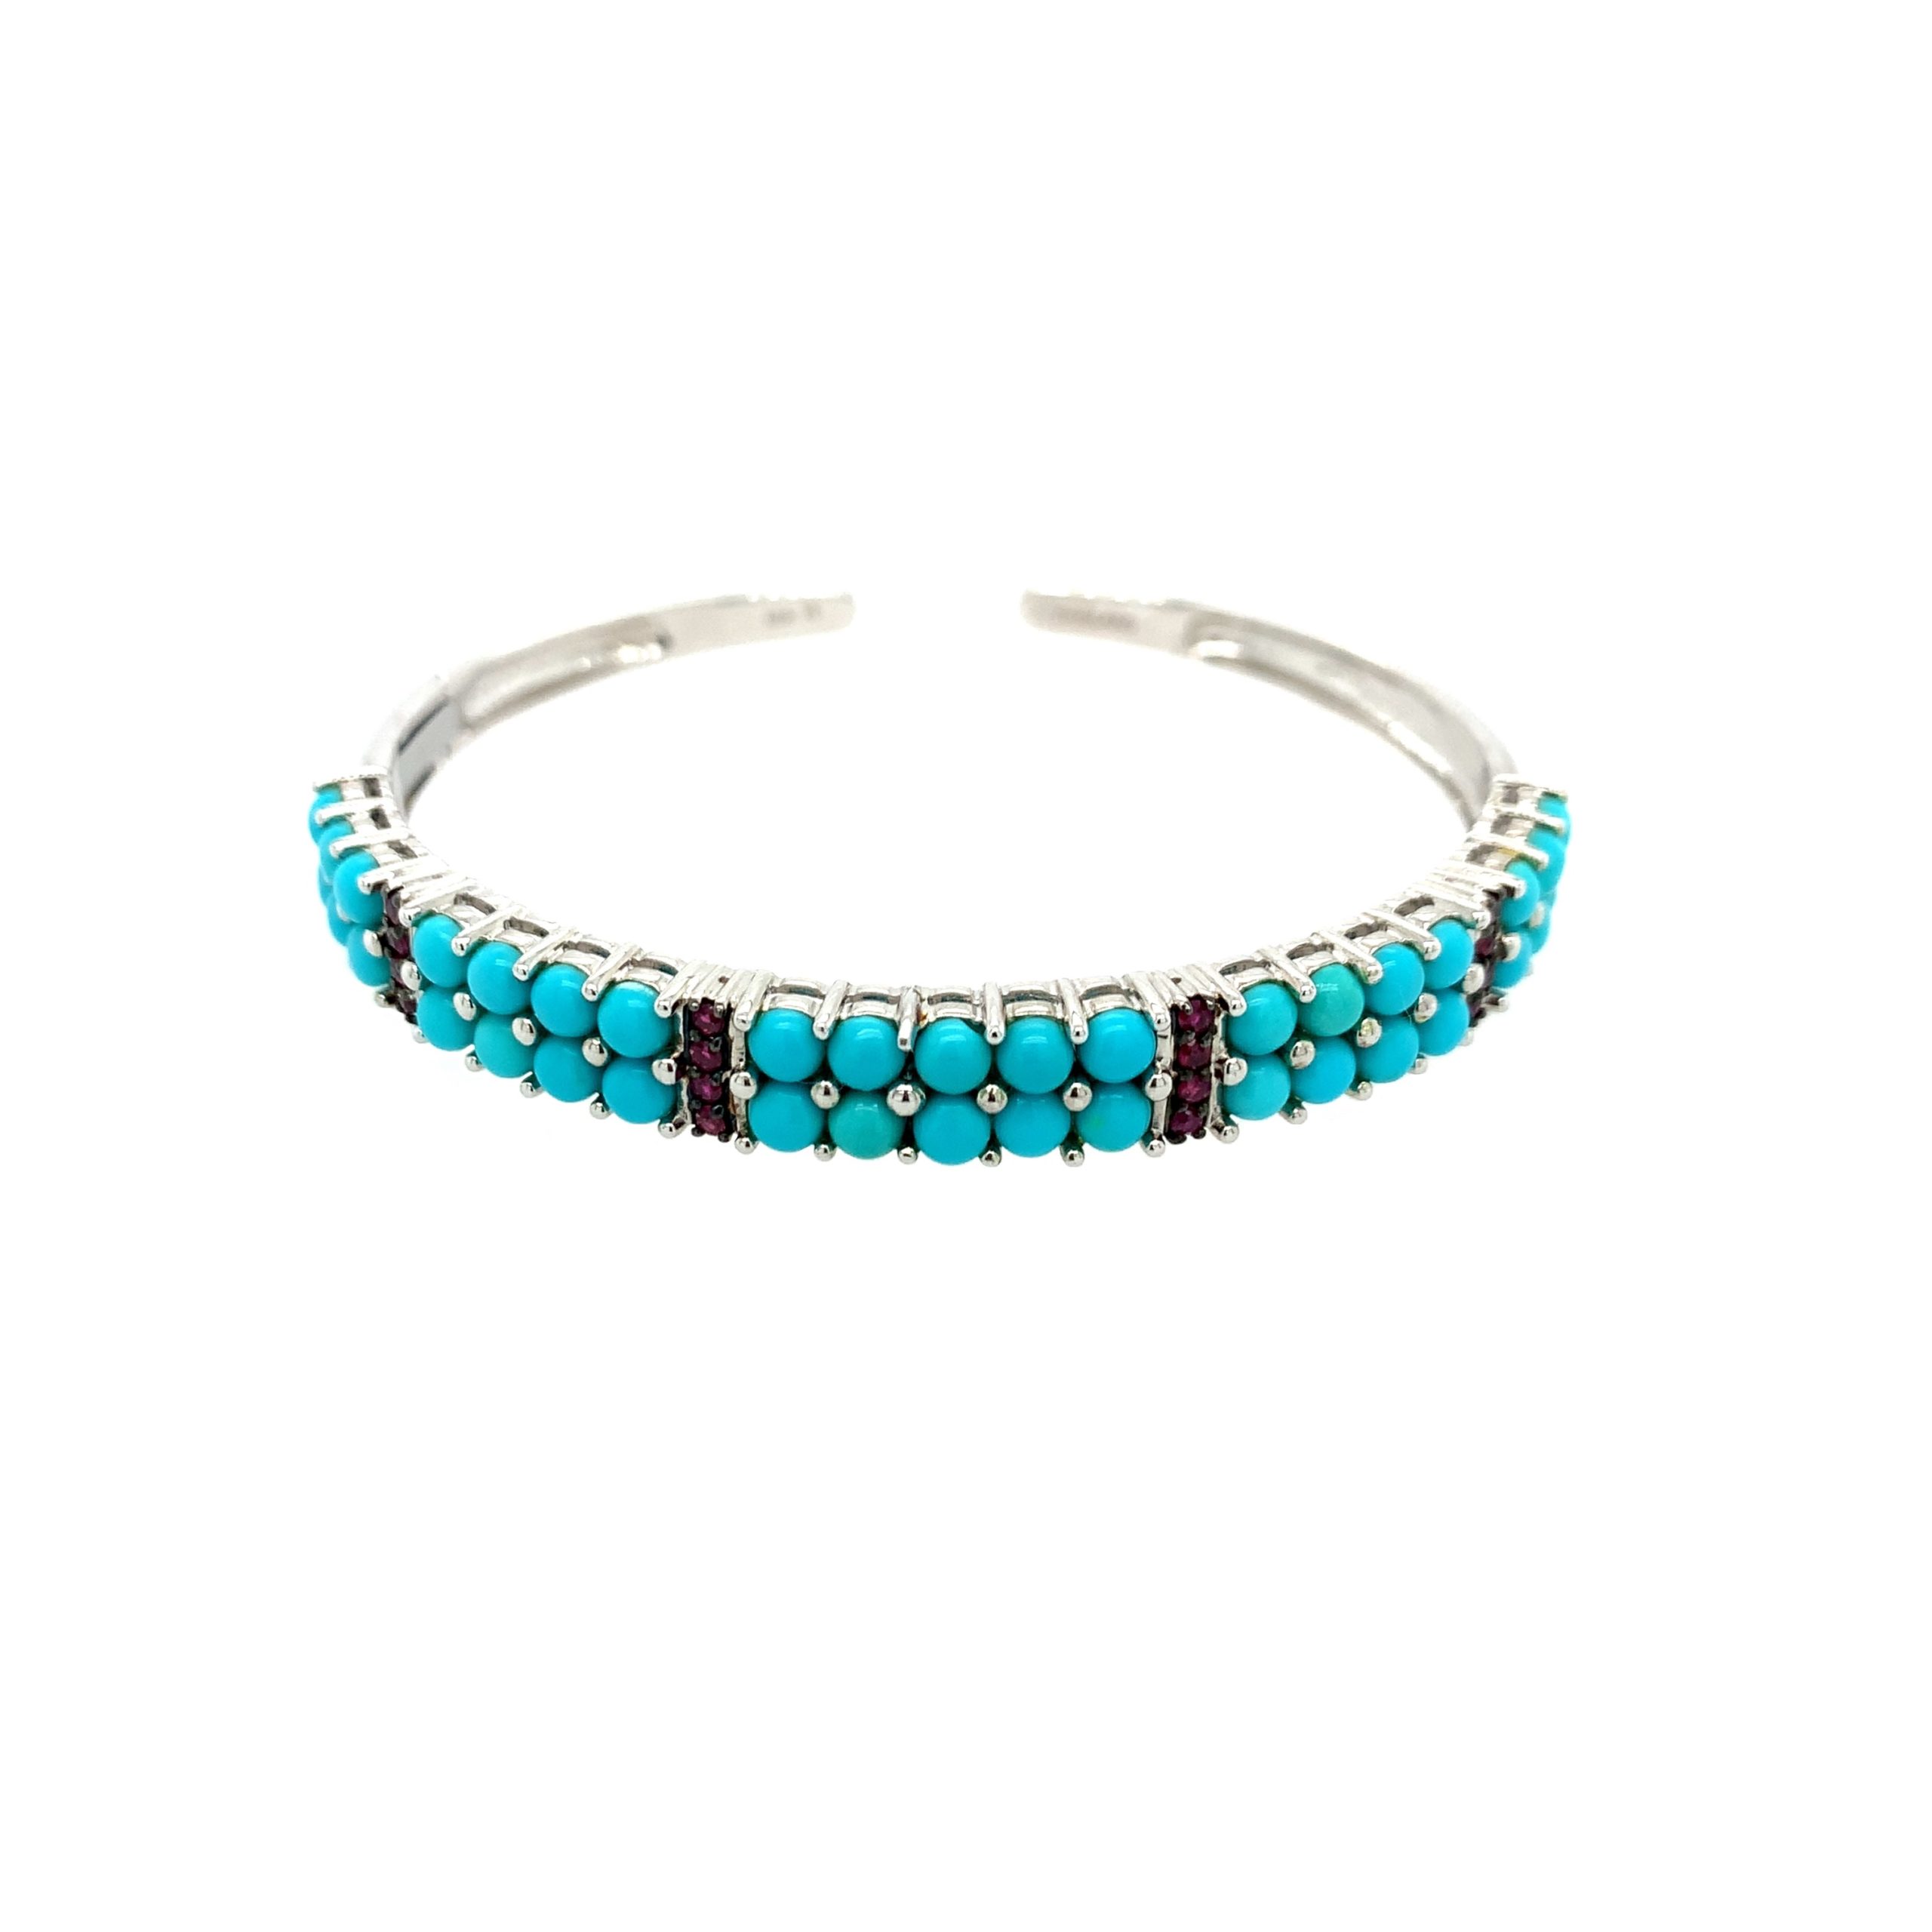 Sterling Silver Turquoise Bangle